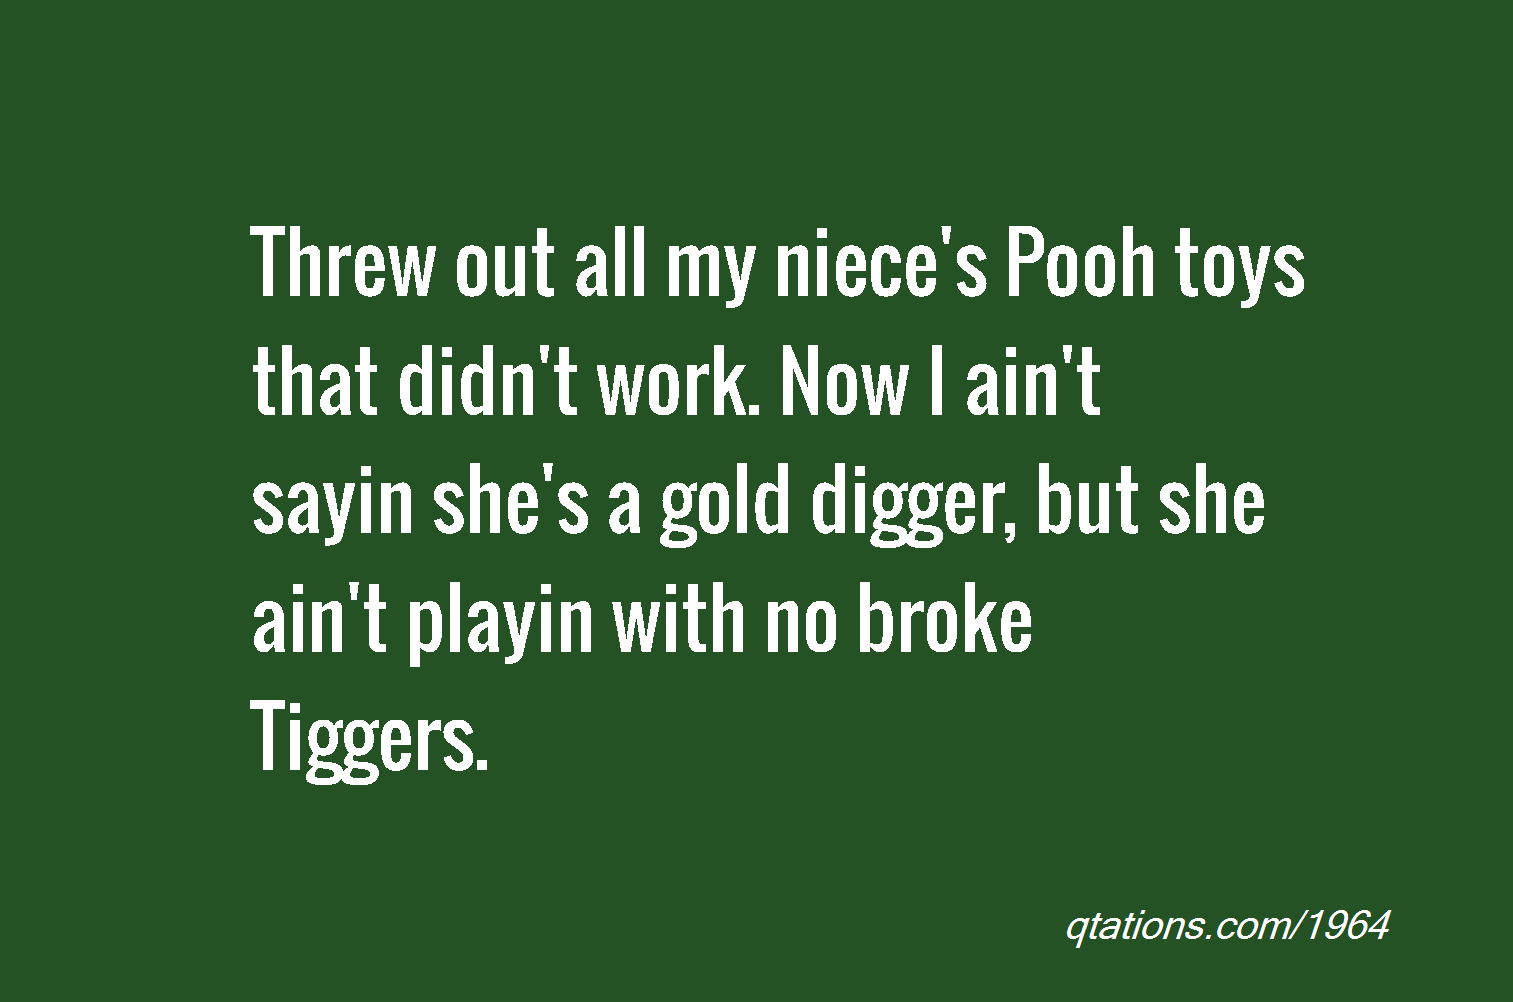 Hi there! 😃 Our #slang term of the day is ”Gold digger“, which